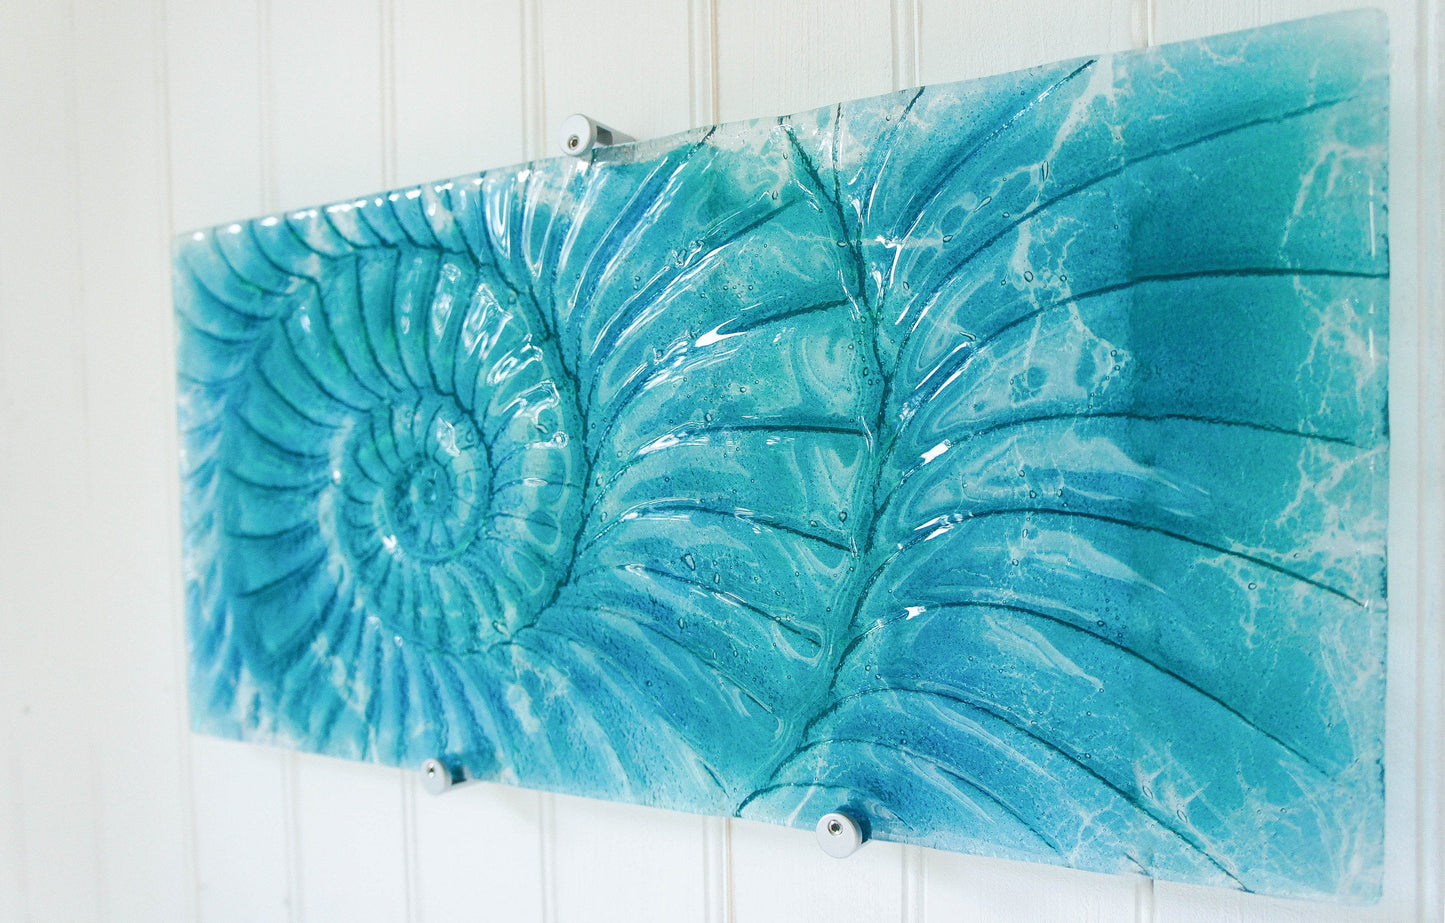 Ammonite Wall Panel - Large Landscape - Swirl Turquoise Blue - 56x26cm(22x10") with fixings